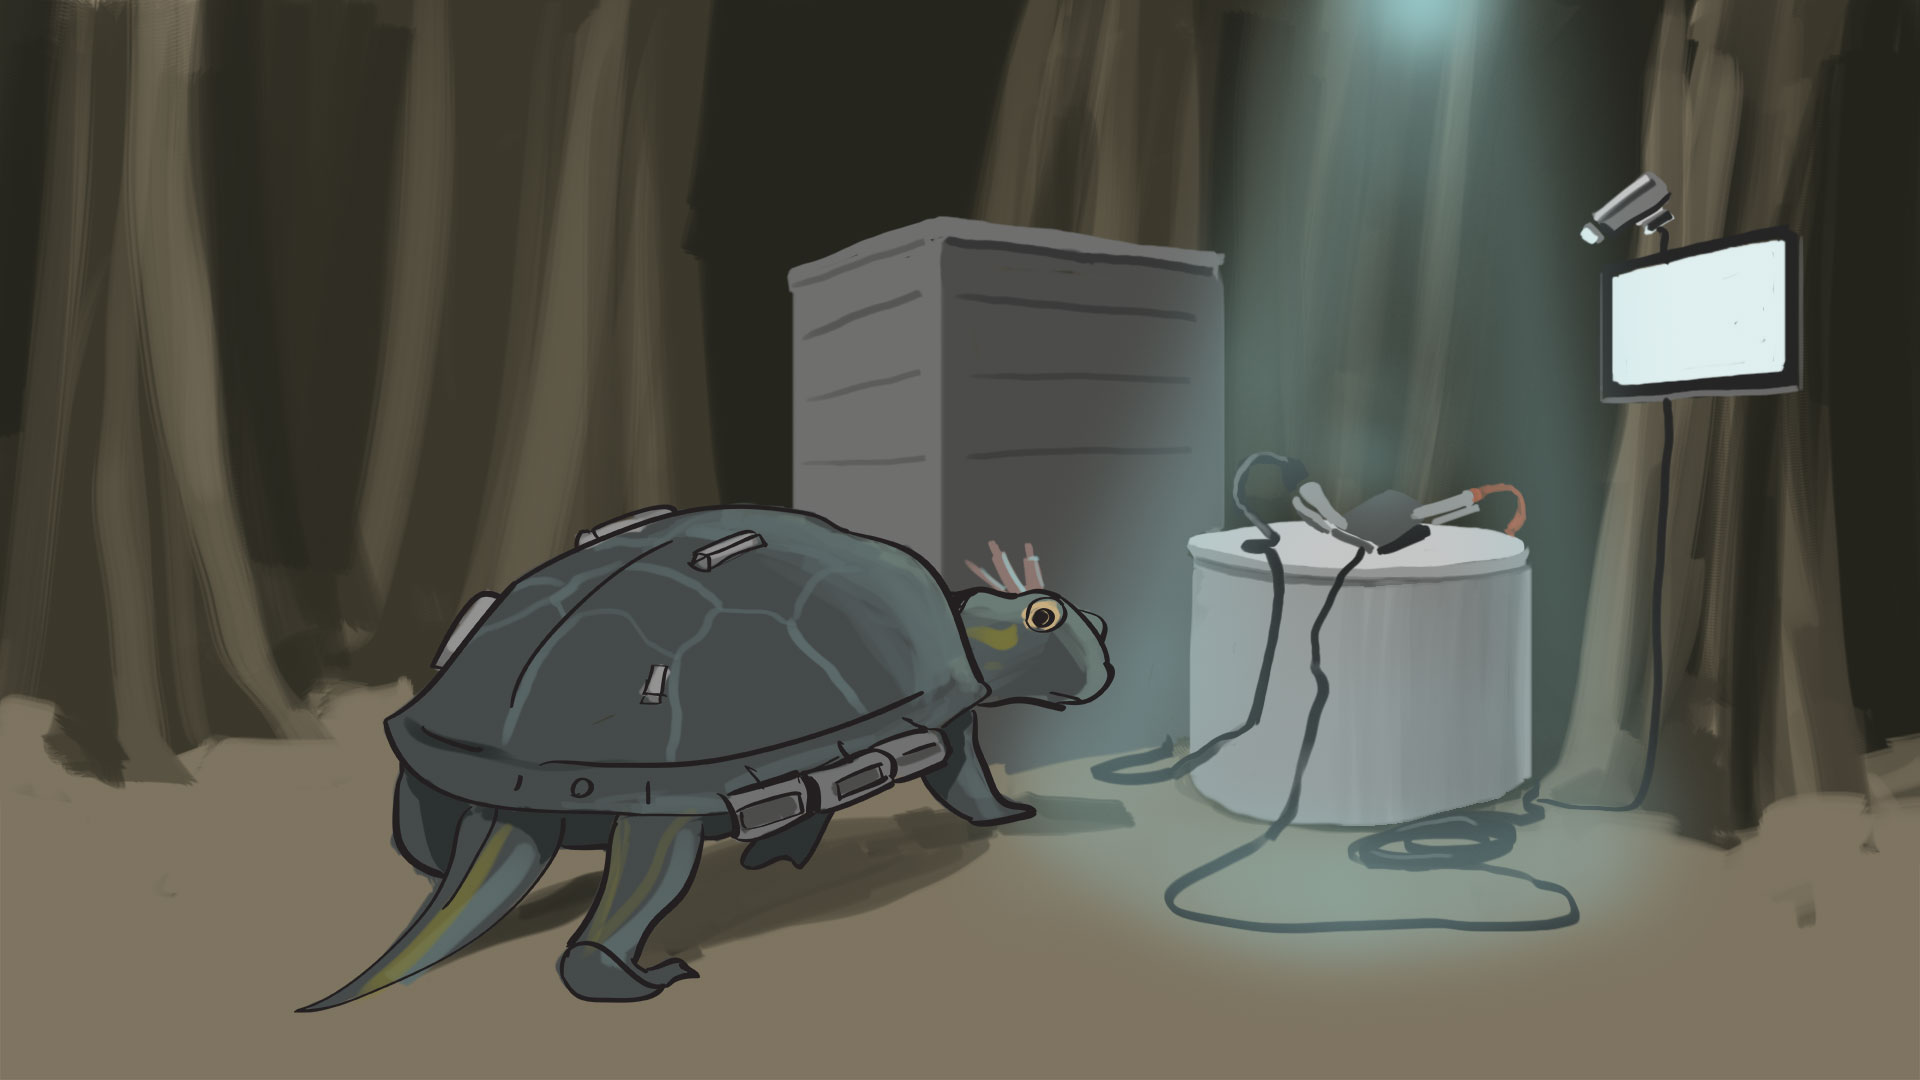 A digital illustration of a turtle approaching computer hardware